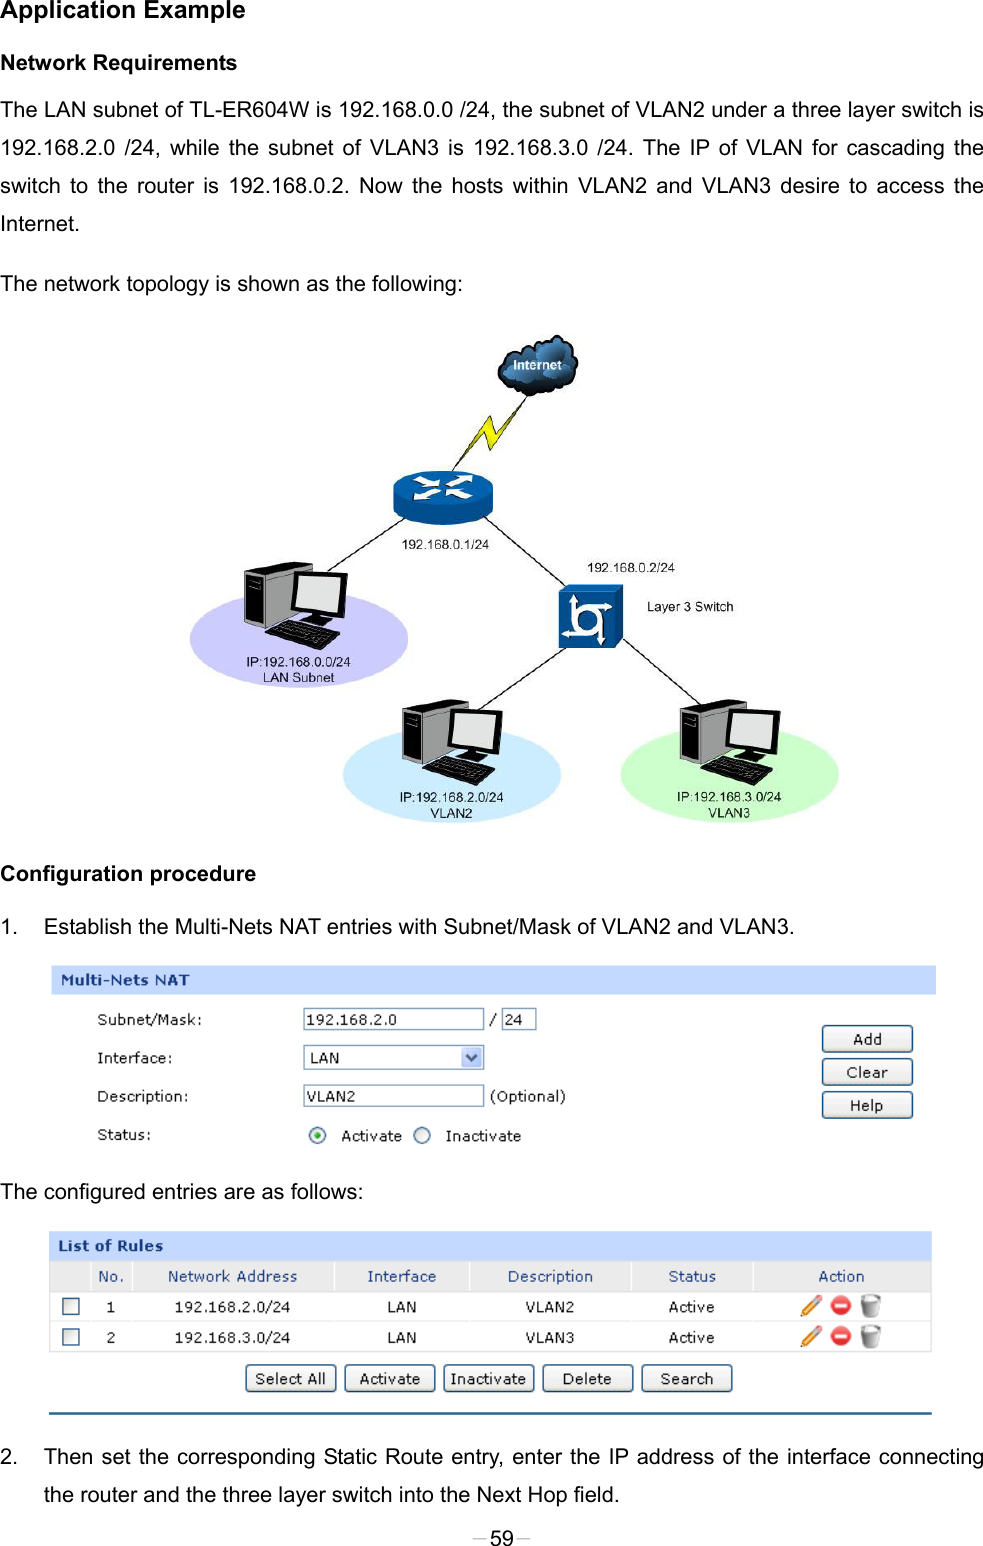  Application Example Network Requirements The LAN subnet of TL-ER604W is 192.168.0.0 /24, the subnet of VLAN2 under a three layer switch is 192.168.2.0 /24, while the subnet of VLAN3 is 192.168.3.0 /24. The IP of VLAN for cascading the switch to the router is 192.168.0.2. Now the hosts within VLAN2 and VLAN3 desire to access the Internet. The network topology is shown as the following:  Configuration procedure 1. Establish the Multi-Nets NAT entries with Subnet/Mask of VLAN2 and VLAN3.  The configured entries are as follows:  2. Then set the corresponding Static Route entry, enter the IP address of the interface connecting the router and the three layer switch into the Next Hop field.   -59- 